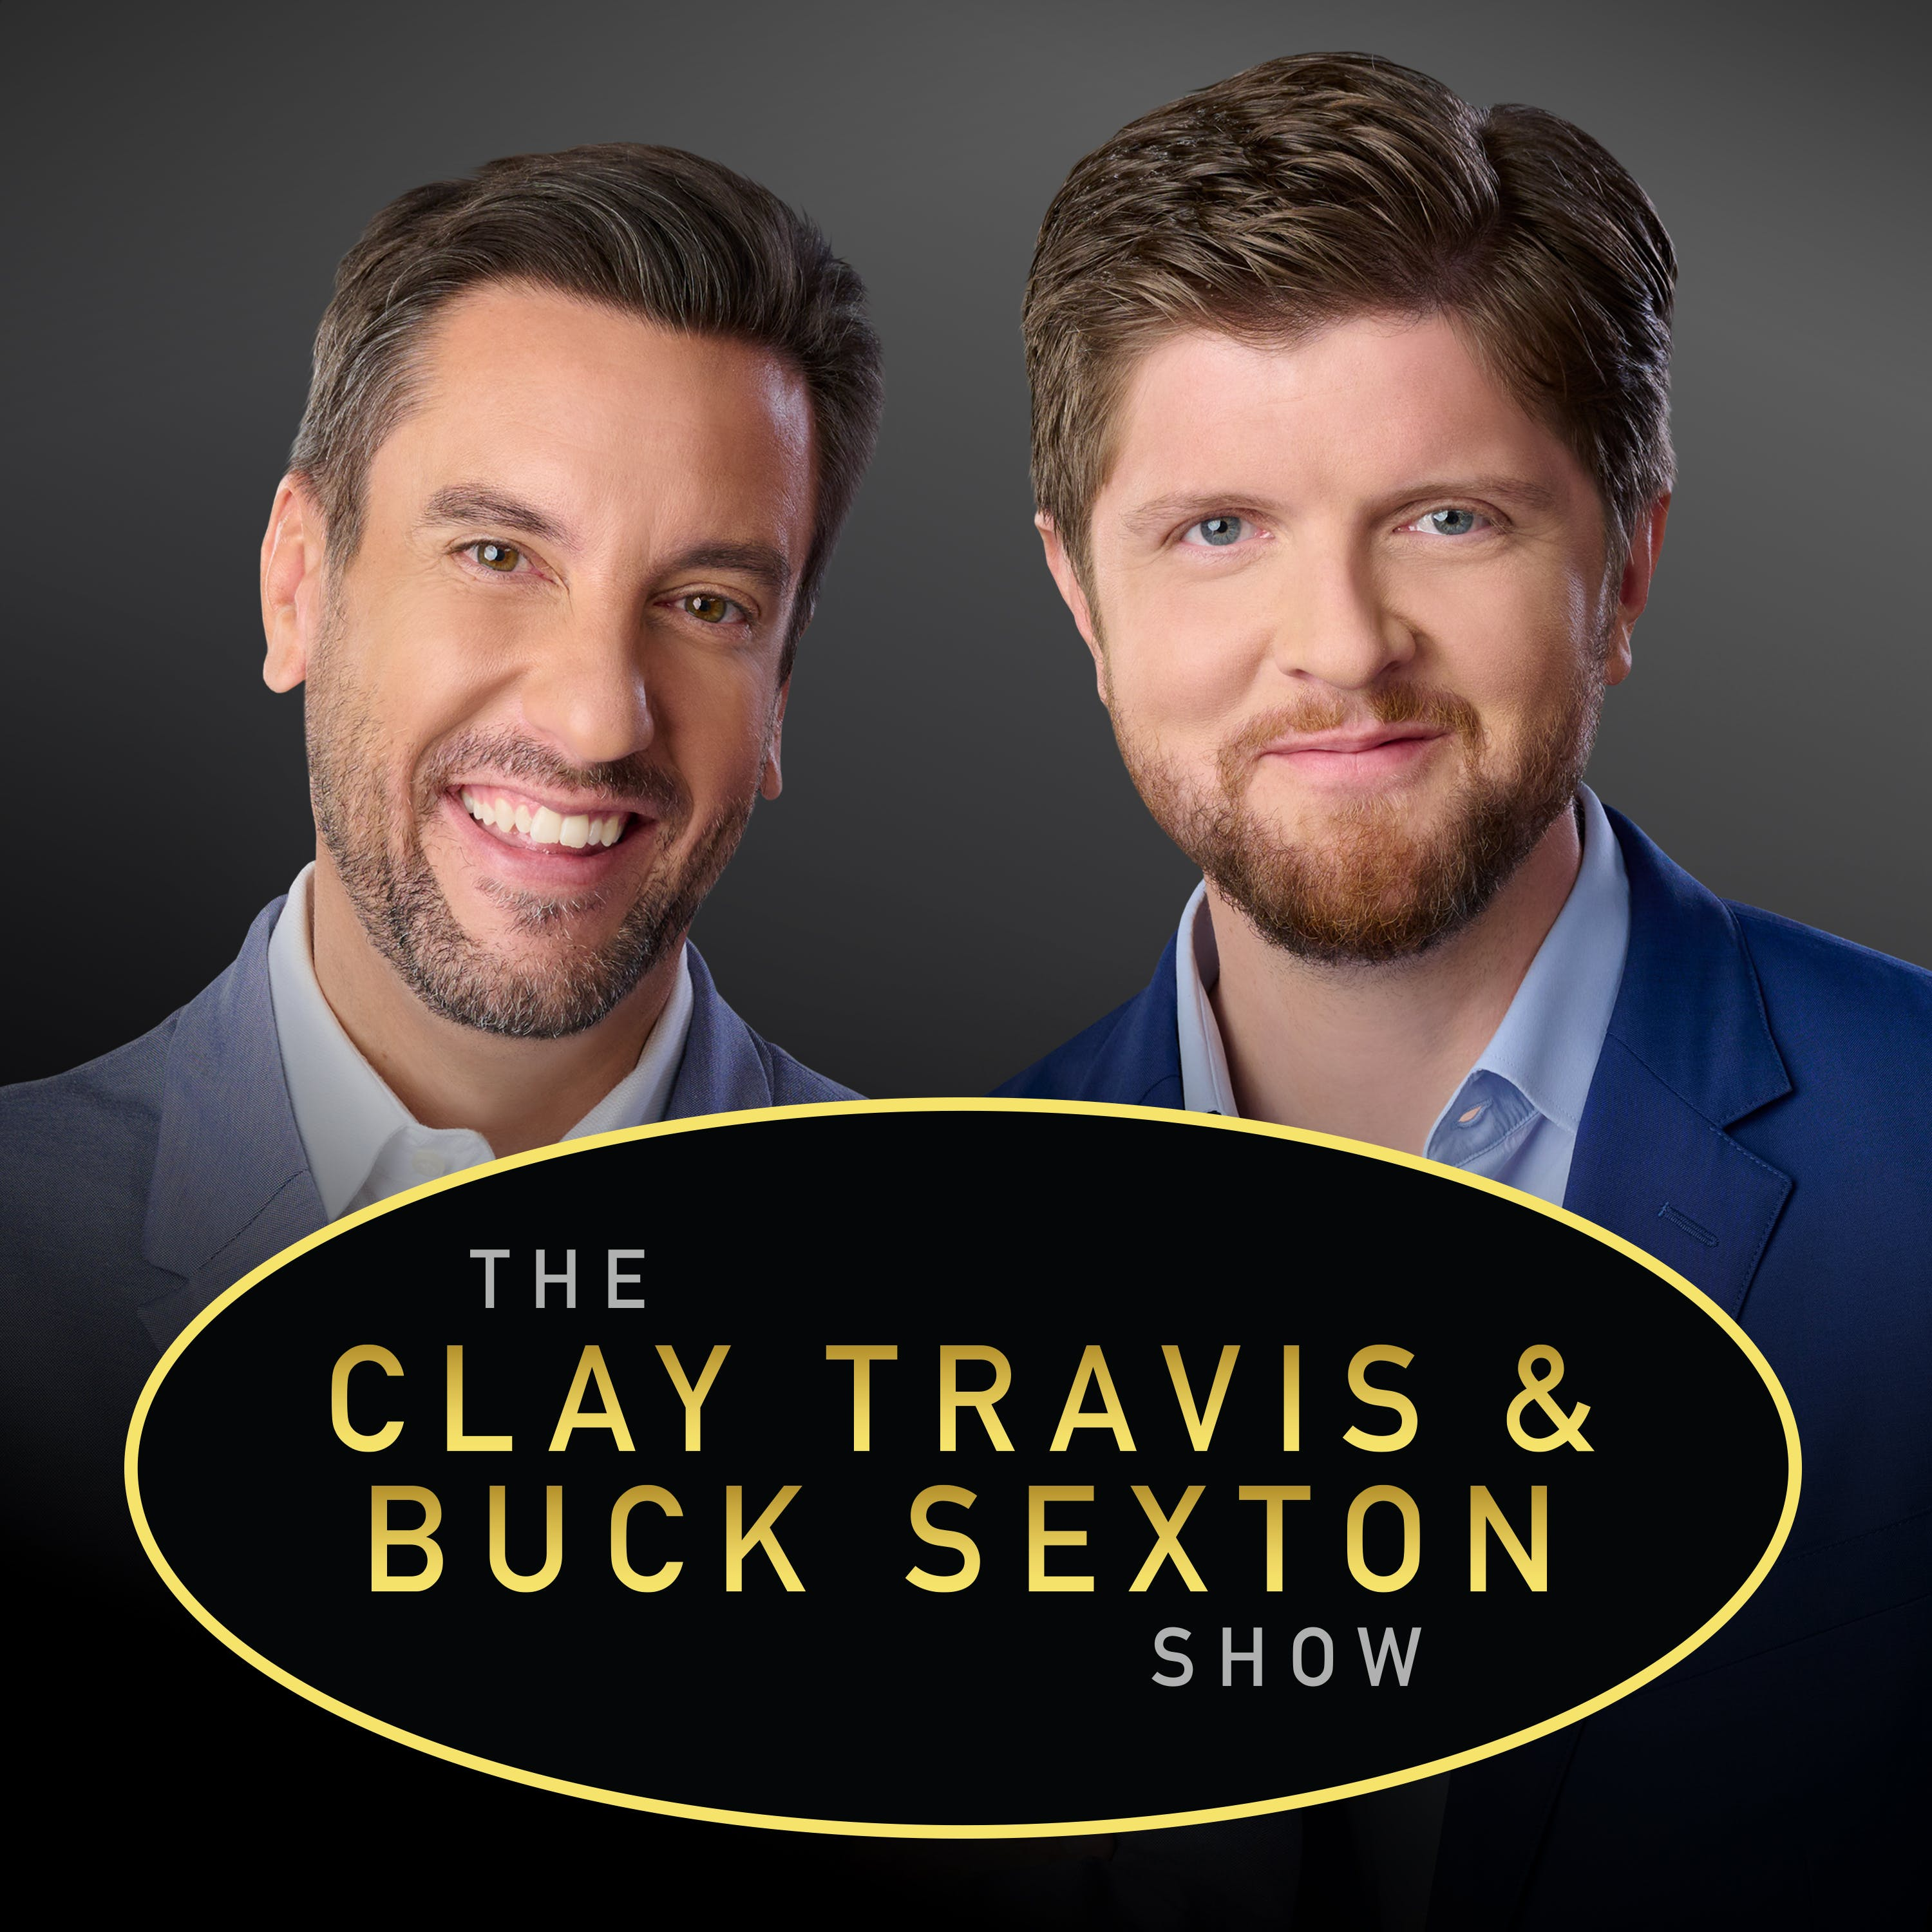 Clay Travis and Buck Sexton Show H1 – Oct 5 2021